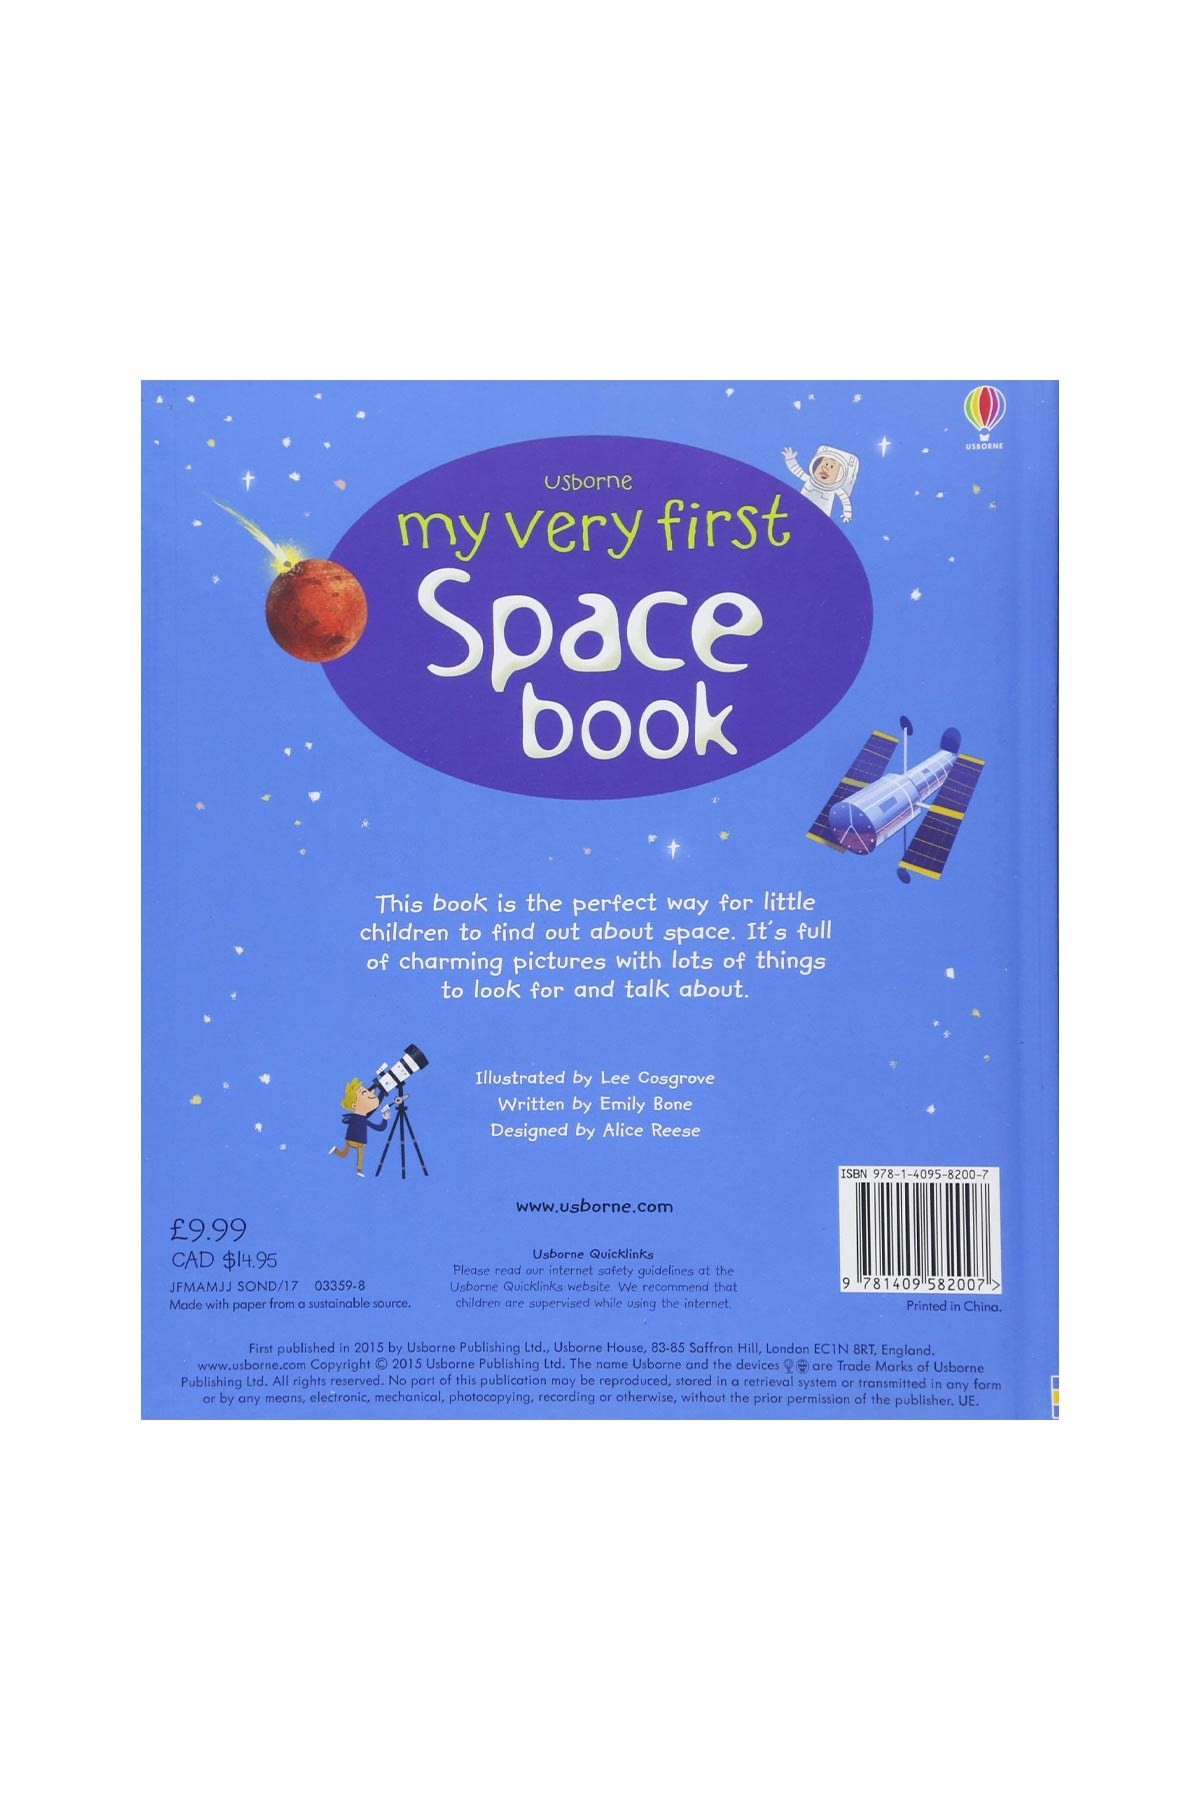 The Usborne My Very First Space Book